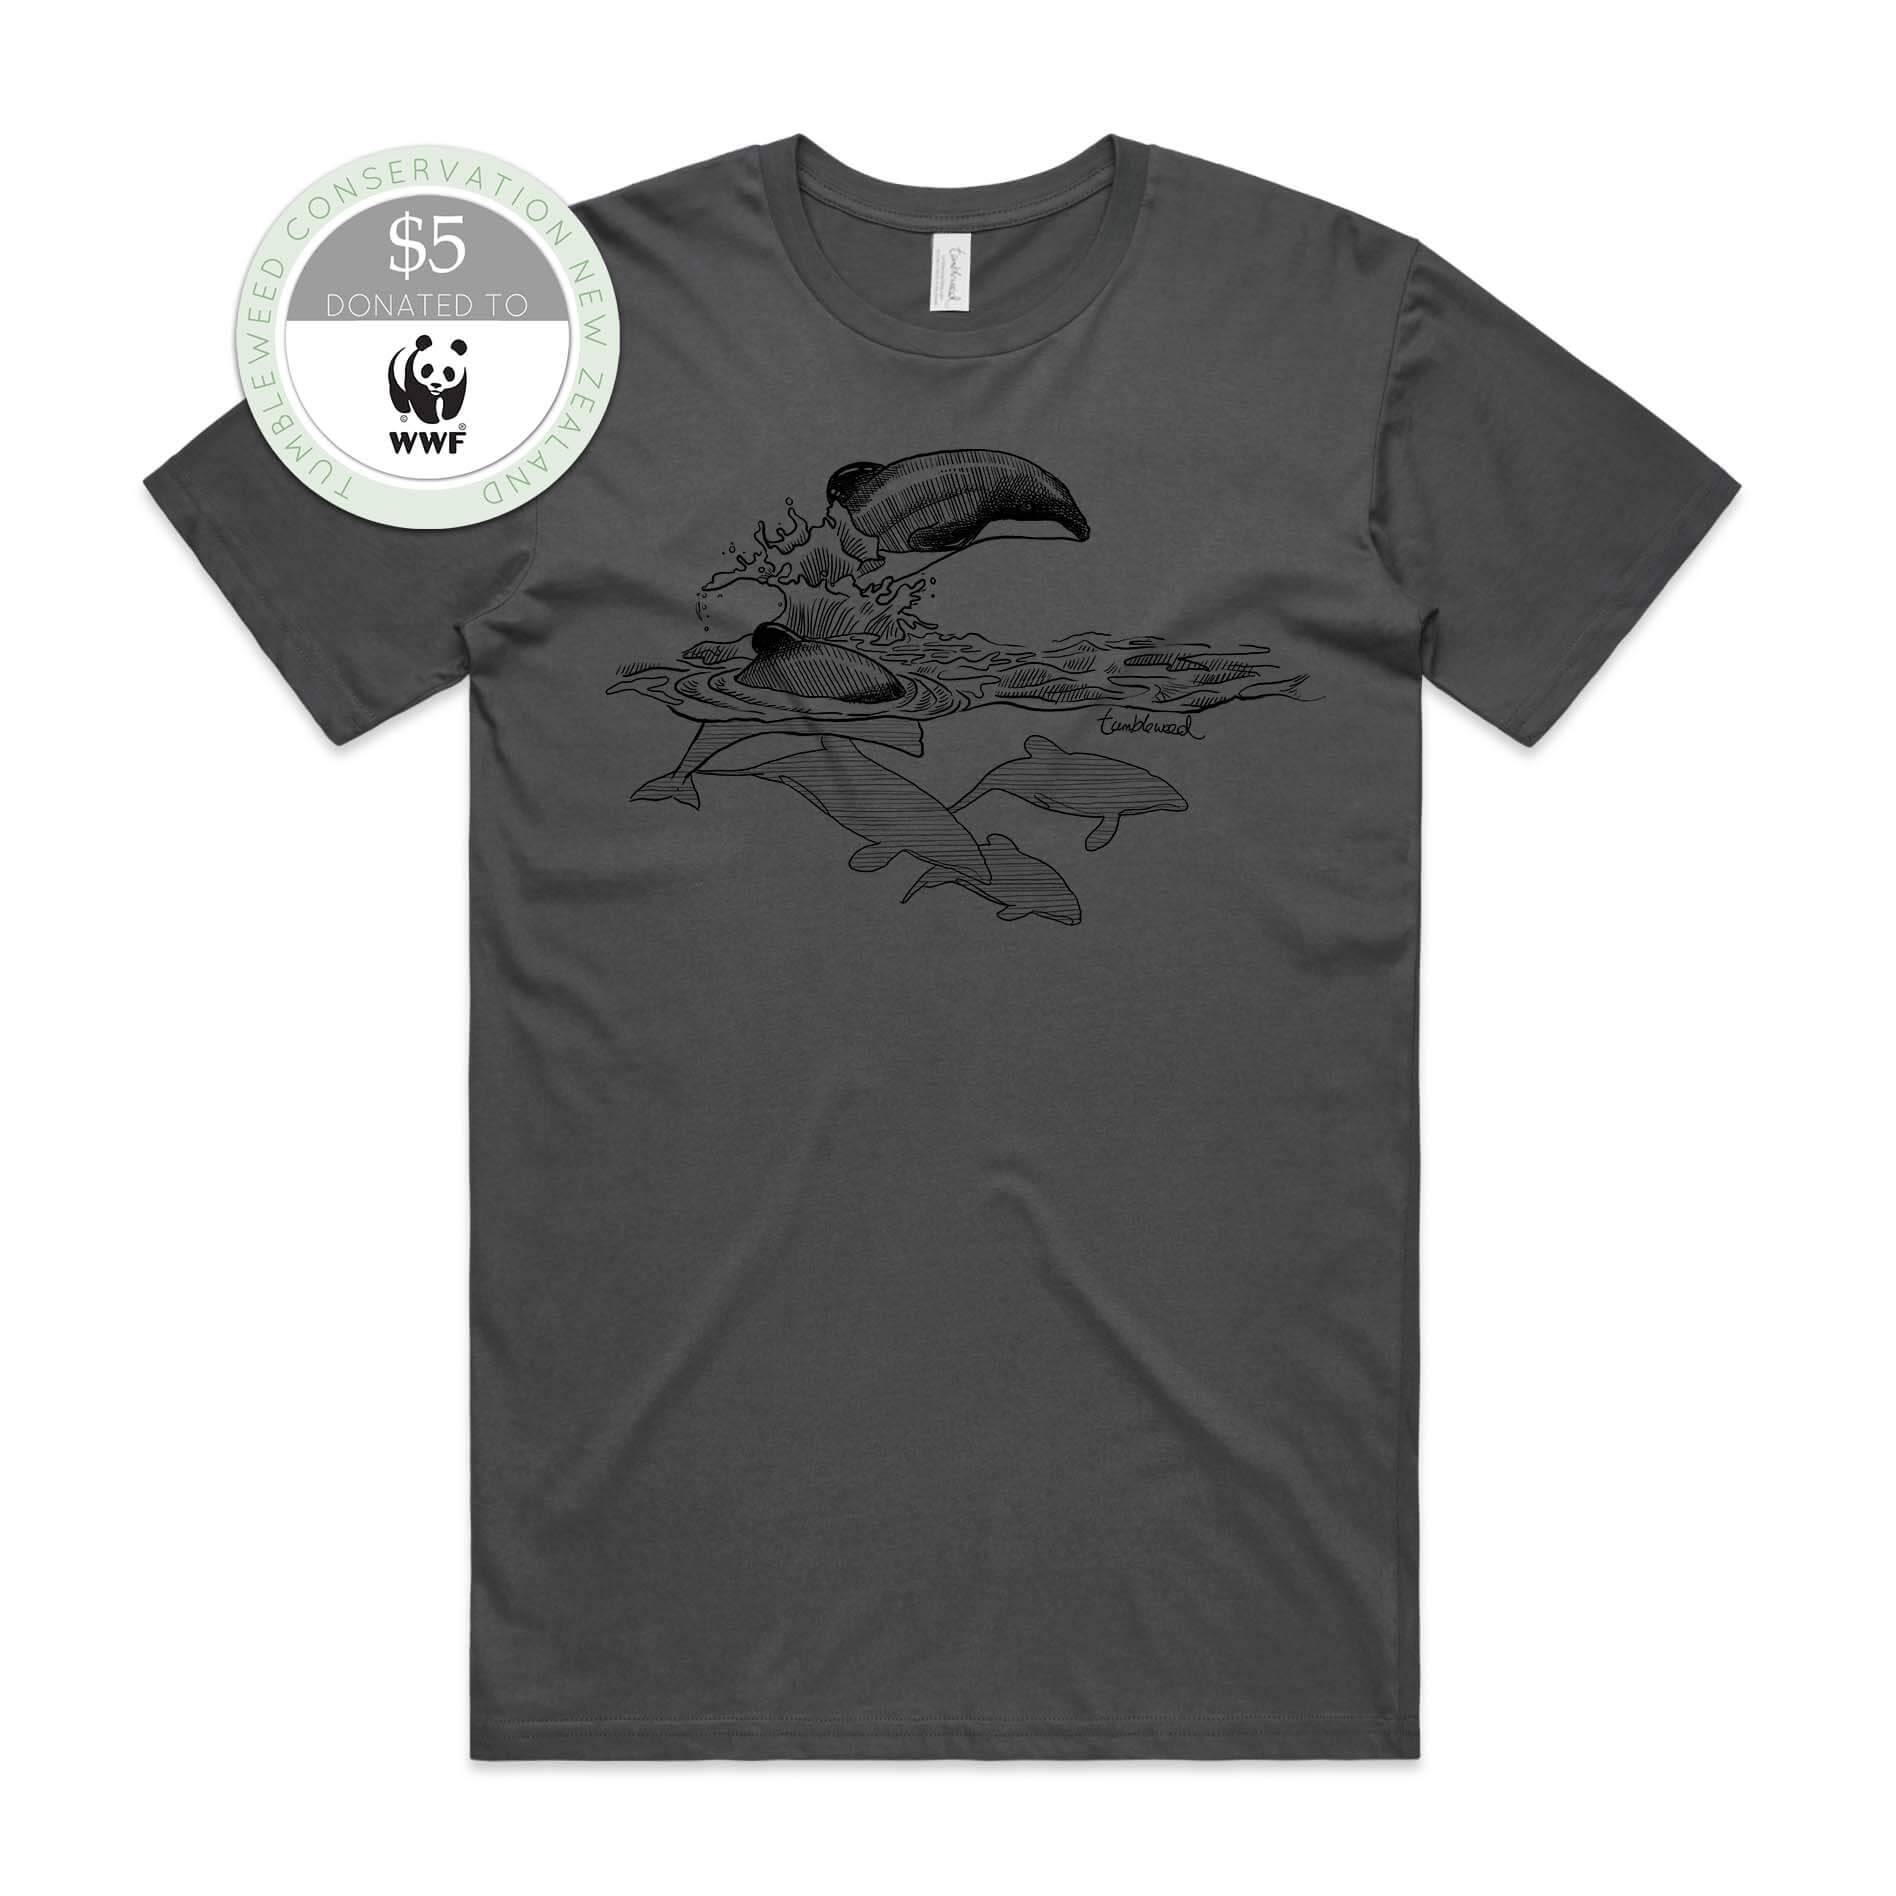 Charcoal, female t-shirt featuring a screen printed Māui dolphin design.